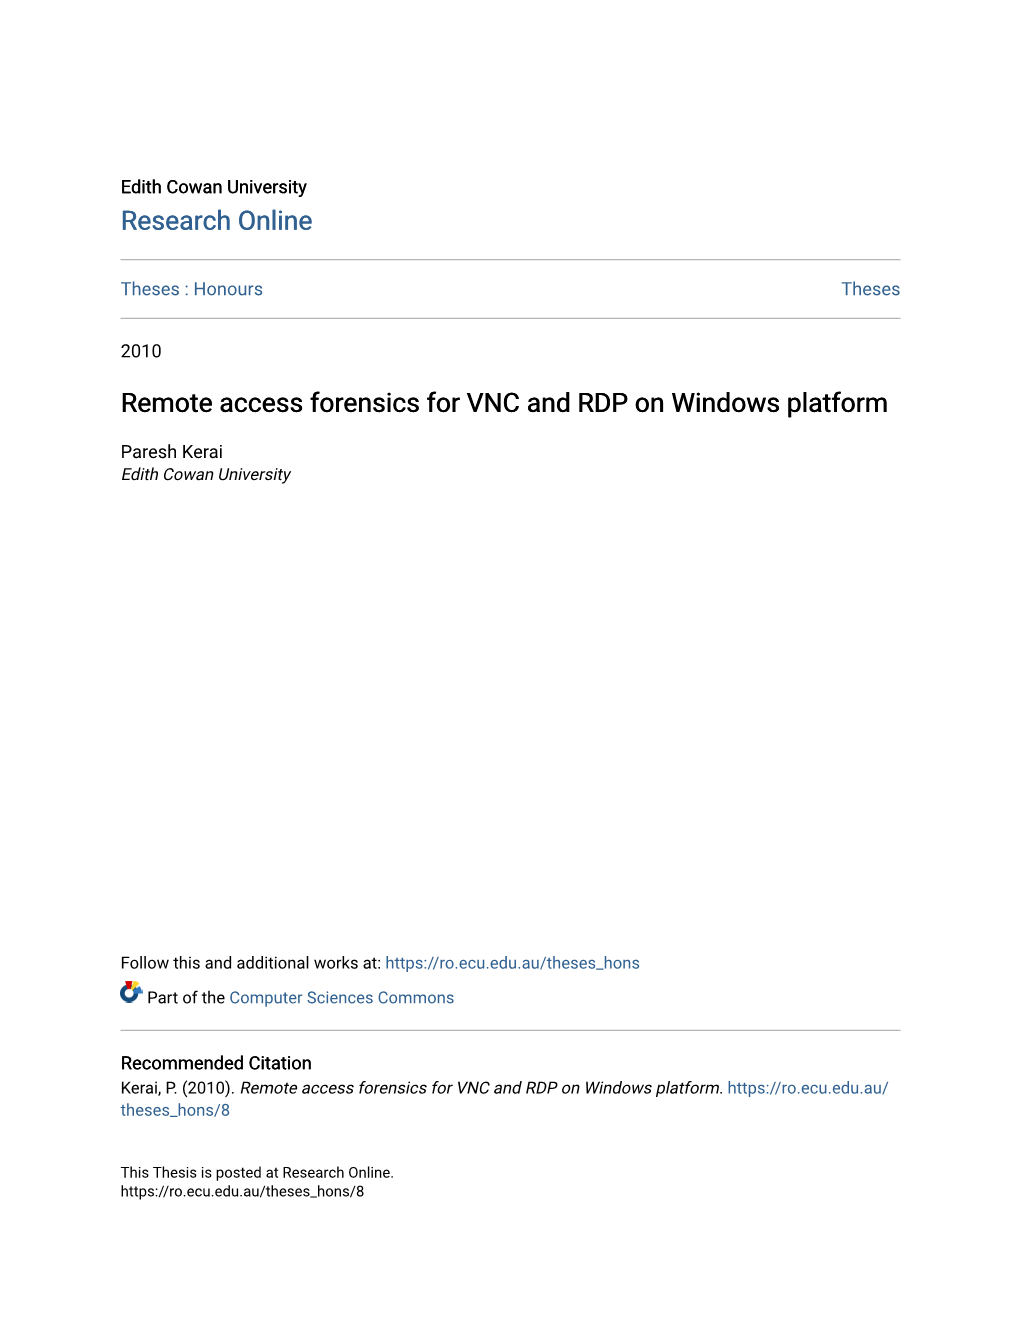 Remote Access Forensics for VNC and RDP on Windows Platform